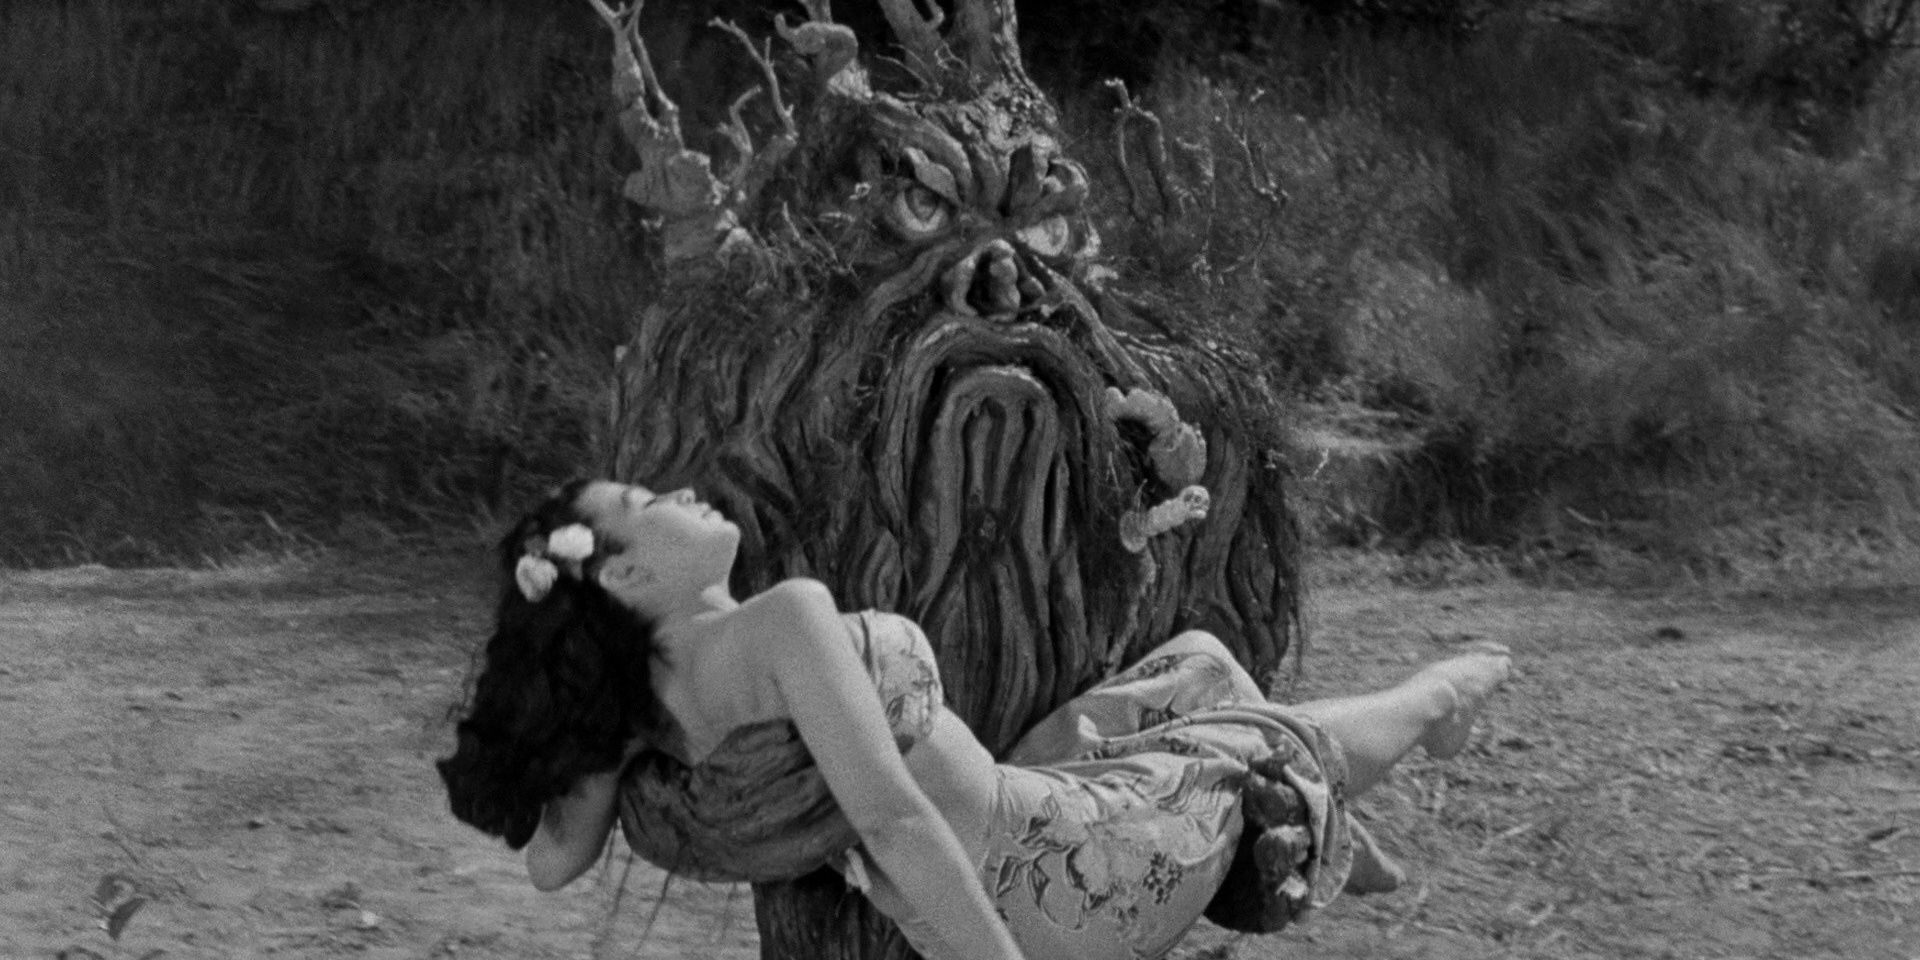 The tree monster carries a girl in From Hell It Came